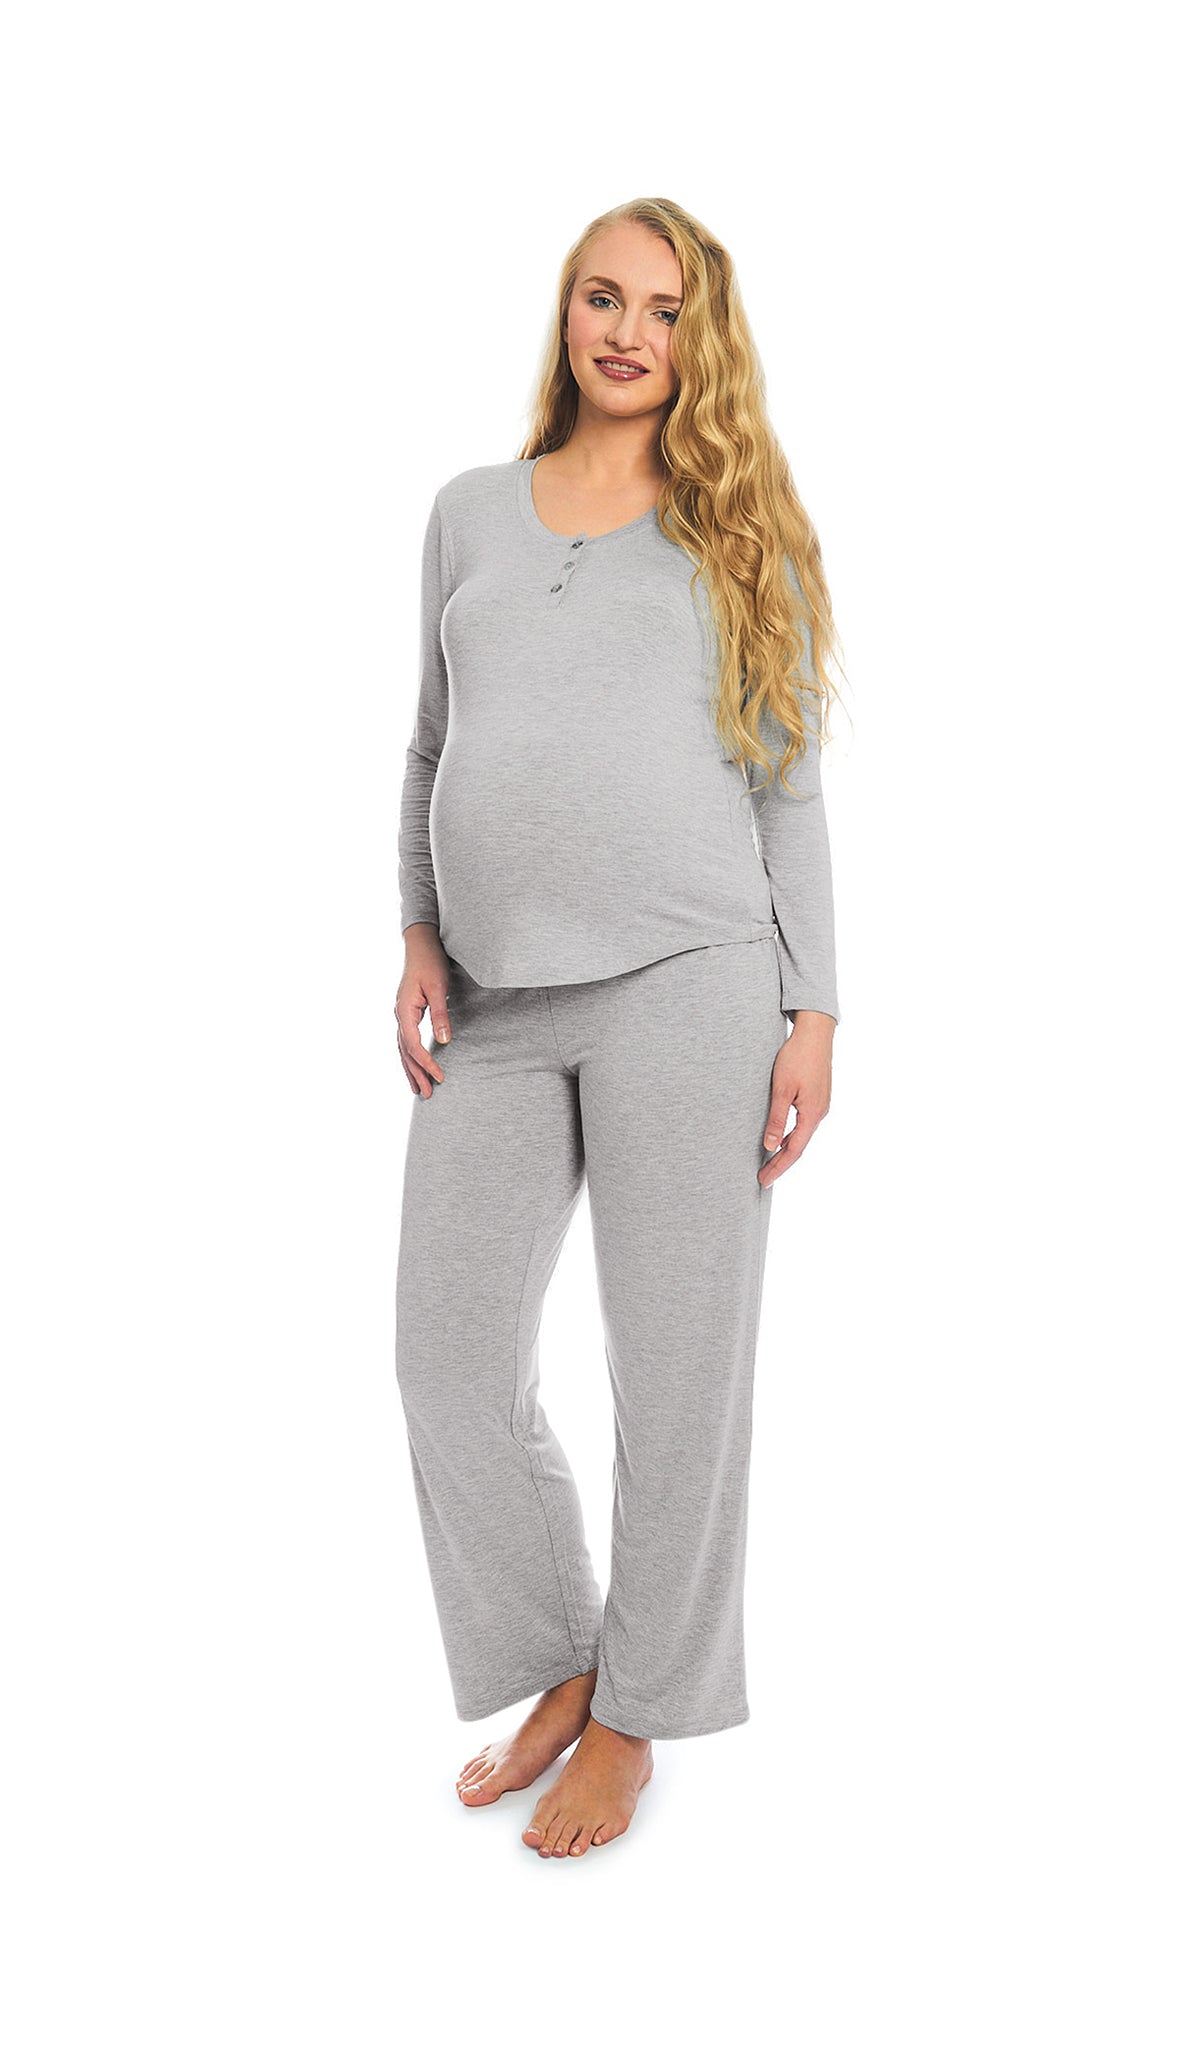 Heather Grey Solid Laina 2-Piece Set. Pregnant woman wearing button front placket long sleeve top and pant.